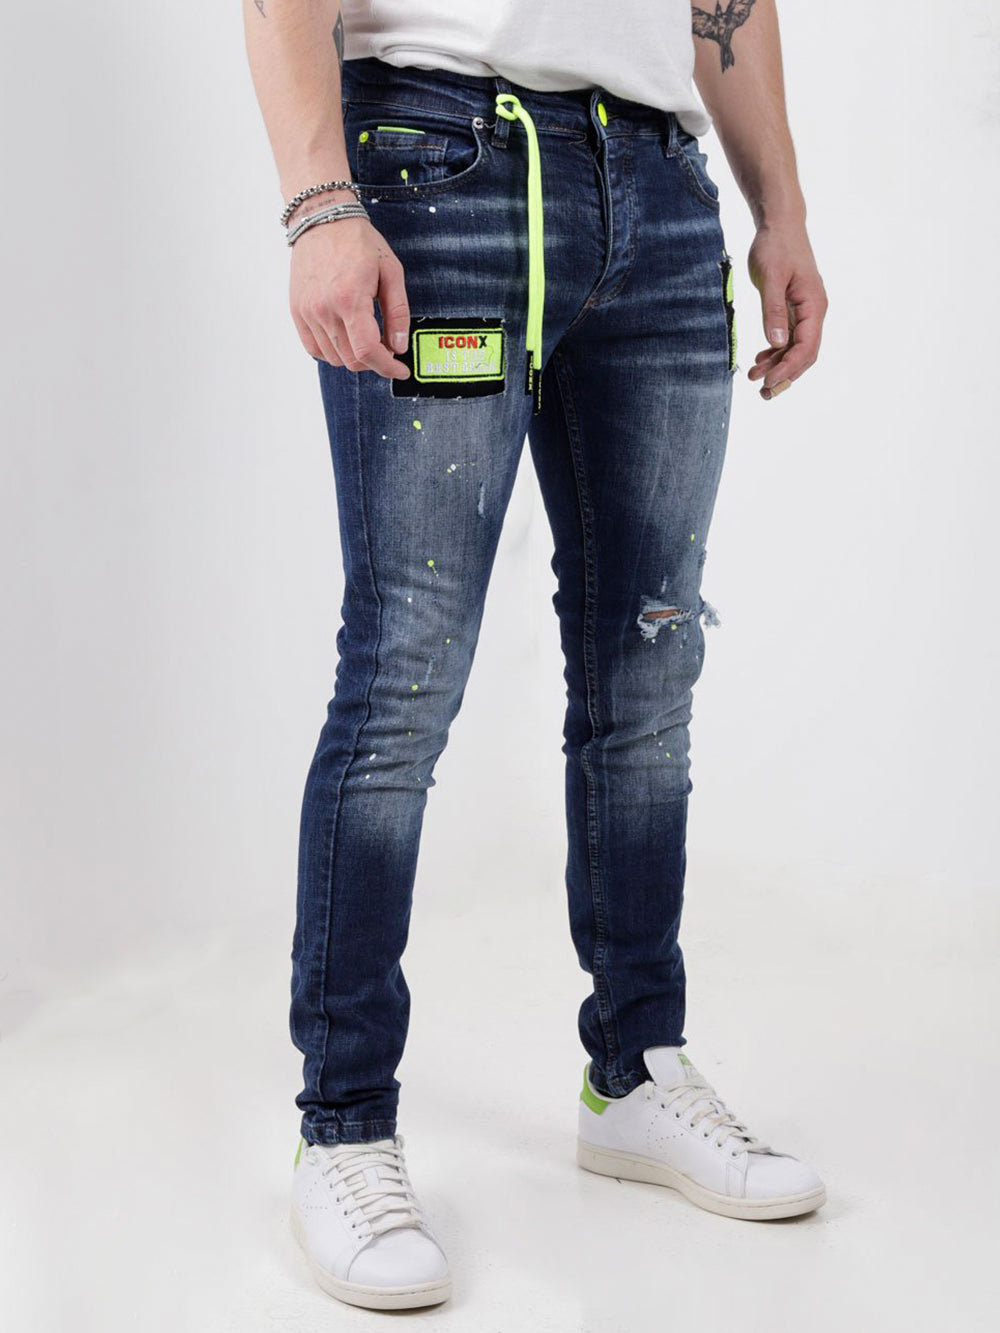 A man wearing a pair of PHOSPHORUS jeans with neon accents.